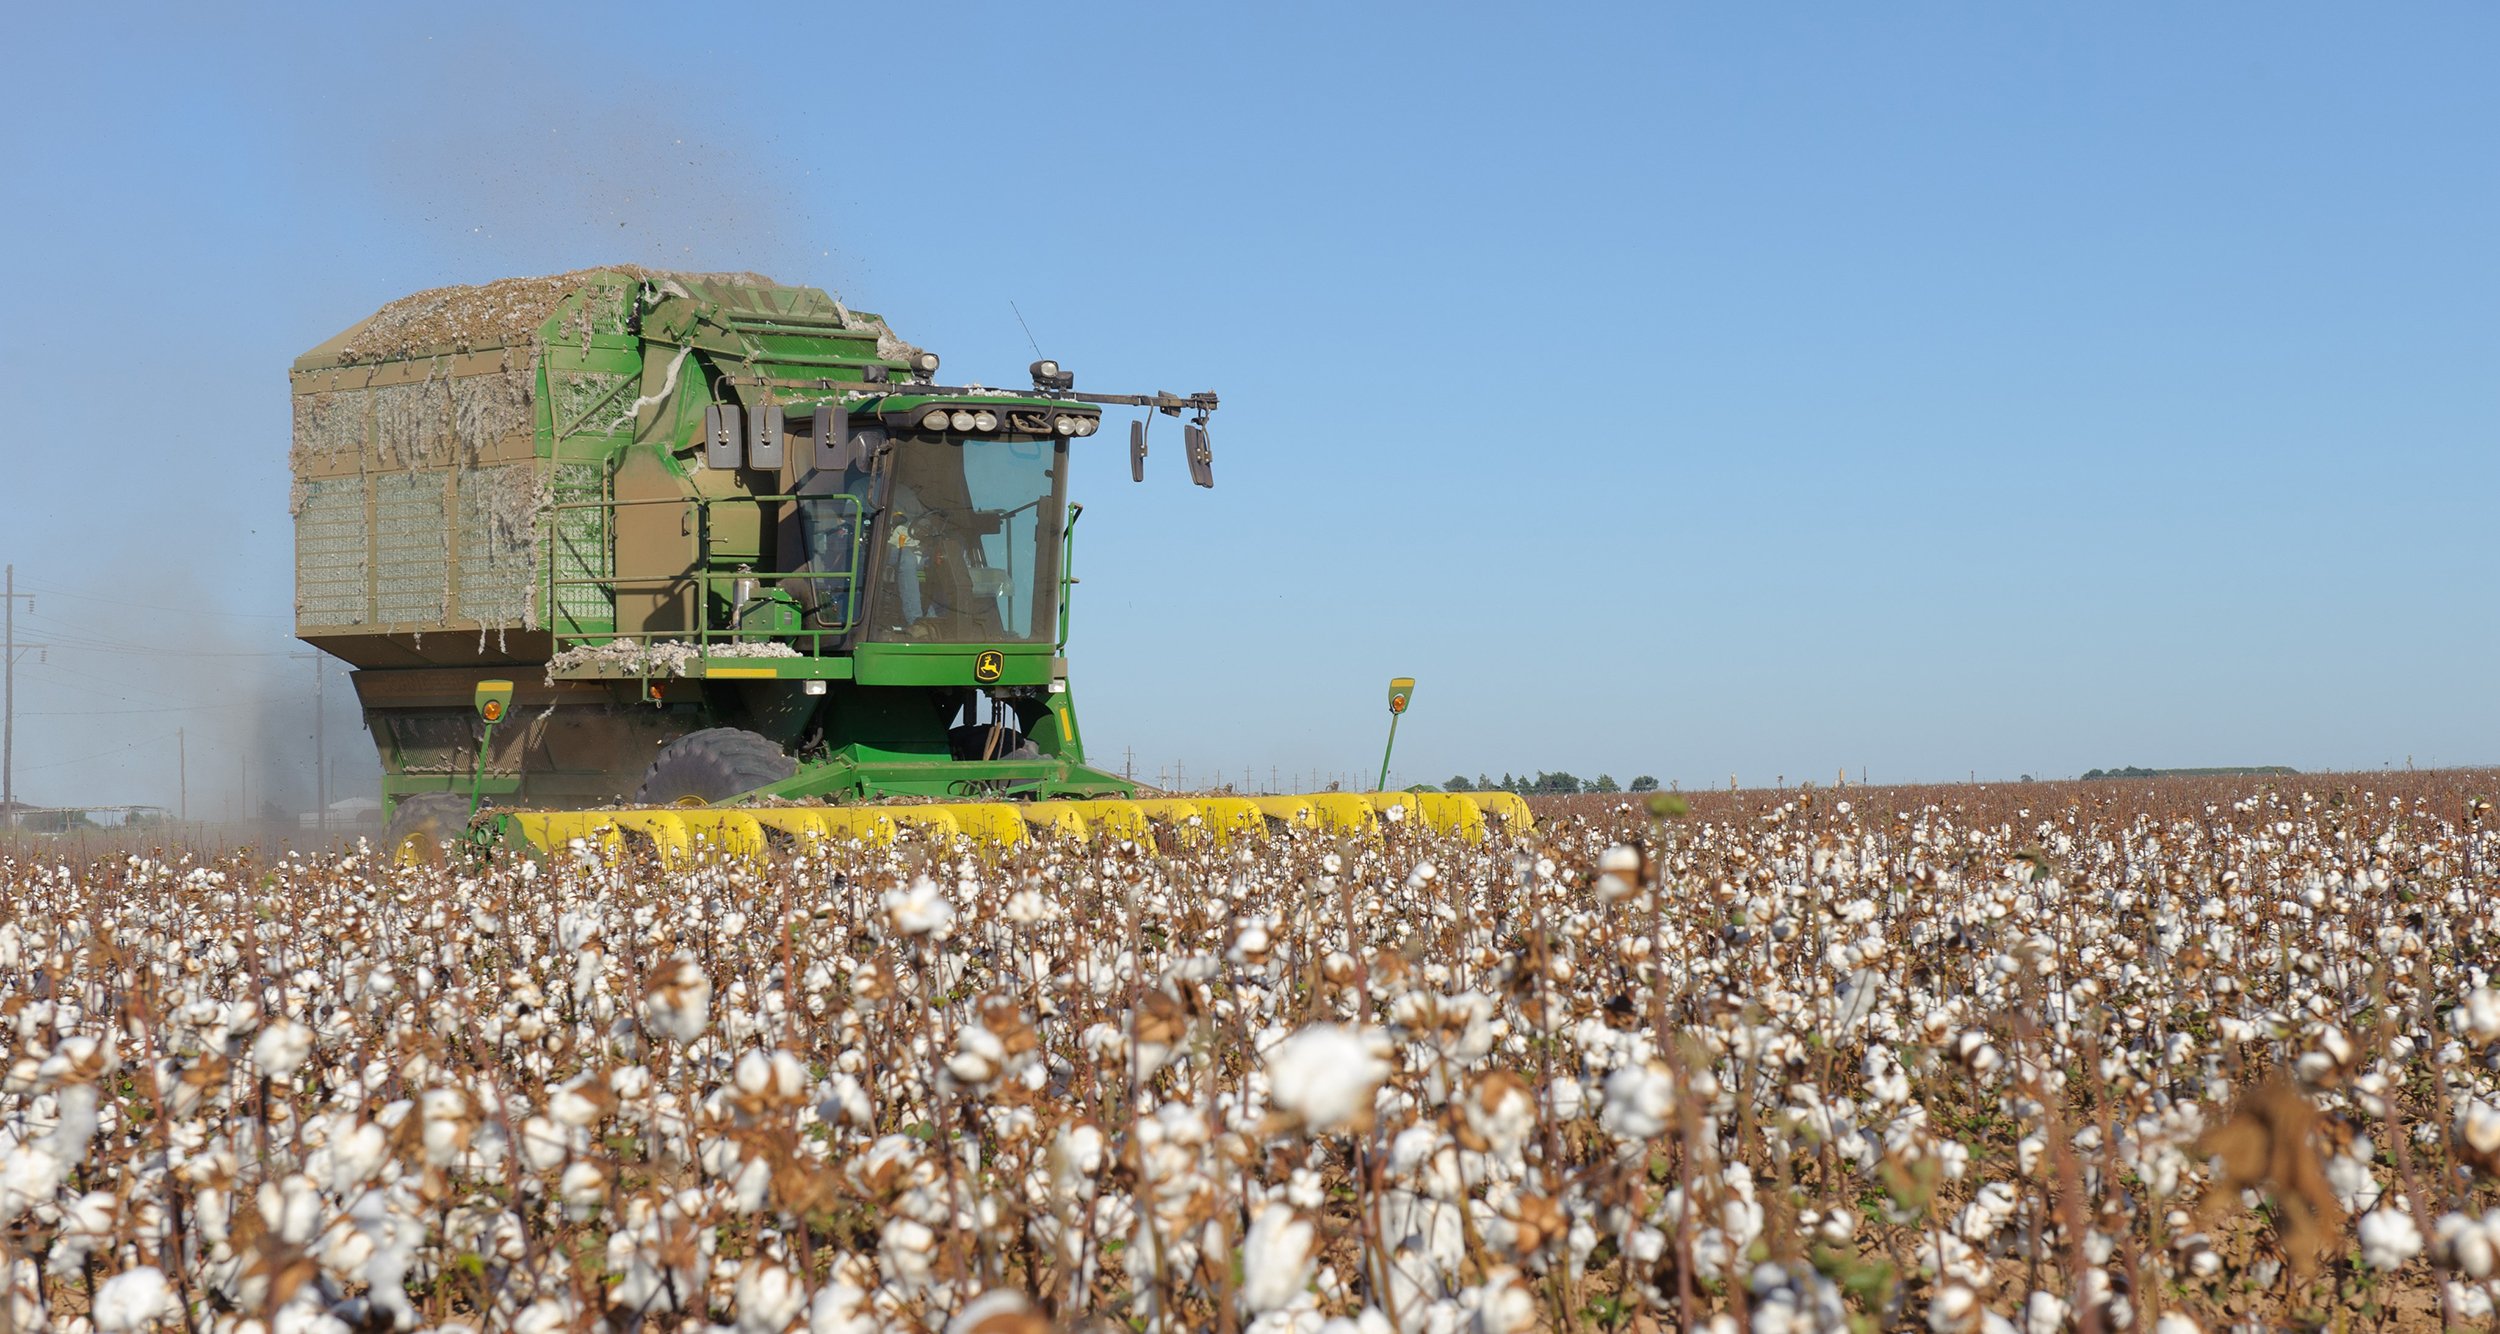 A cotton stripper pulls cotton bolls and leaves from the stalk during a harvest.